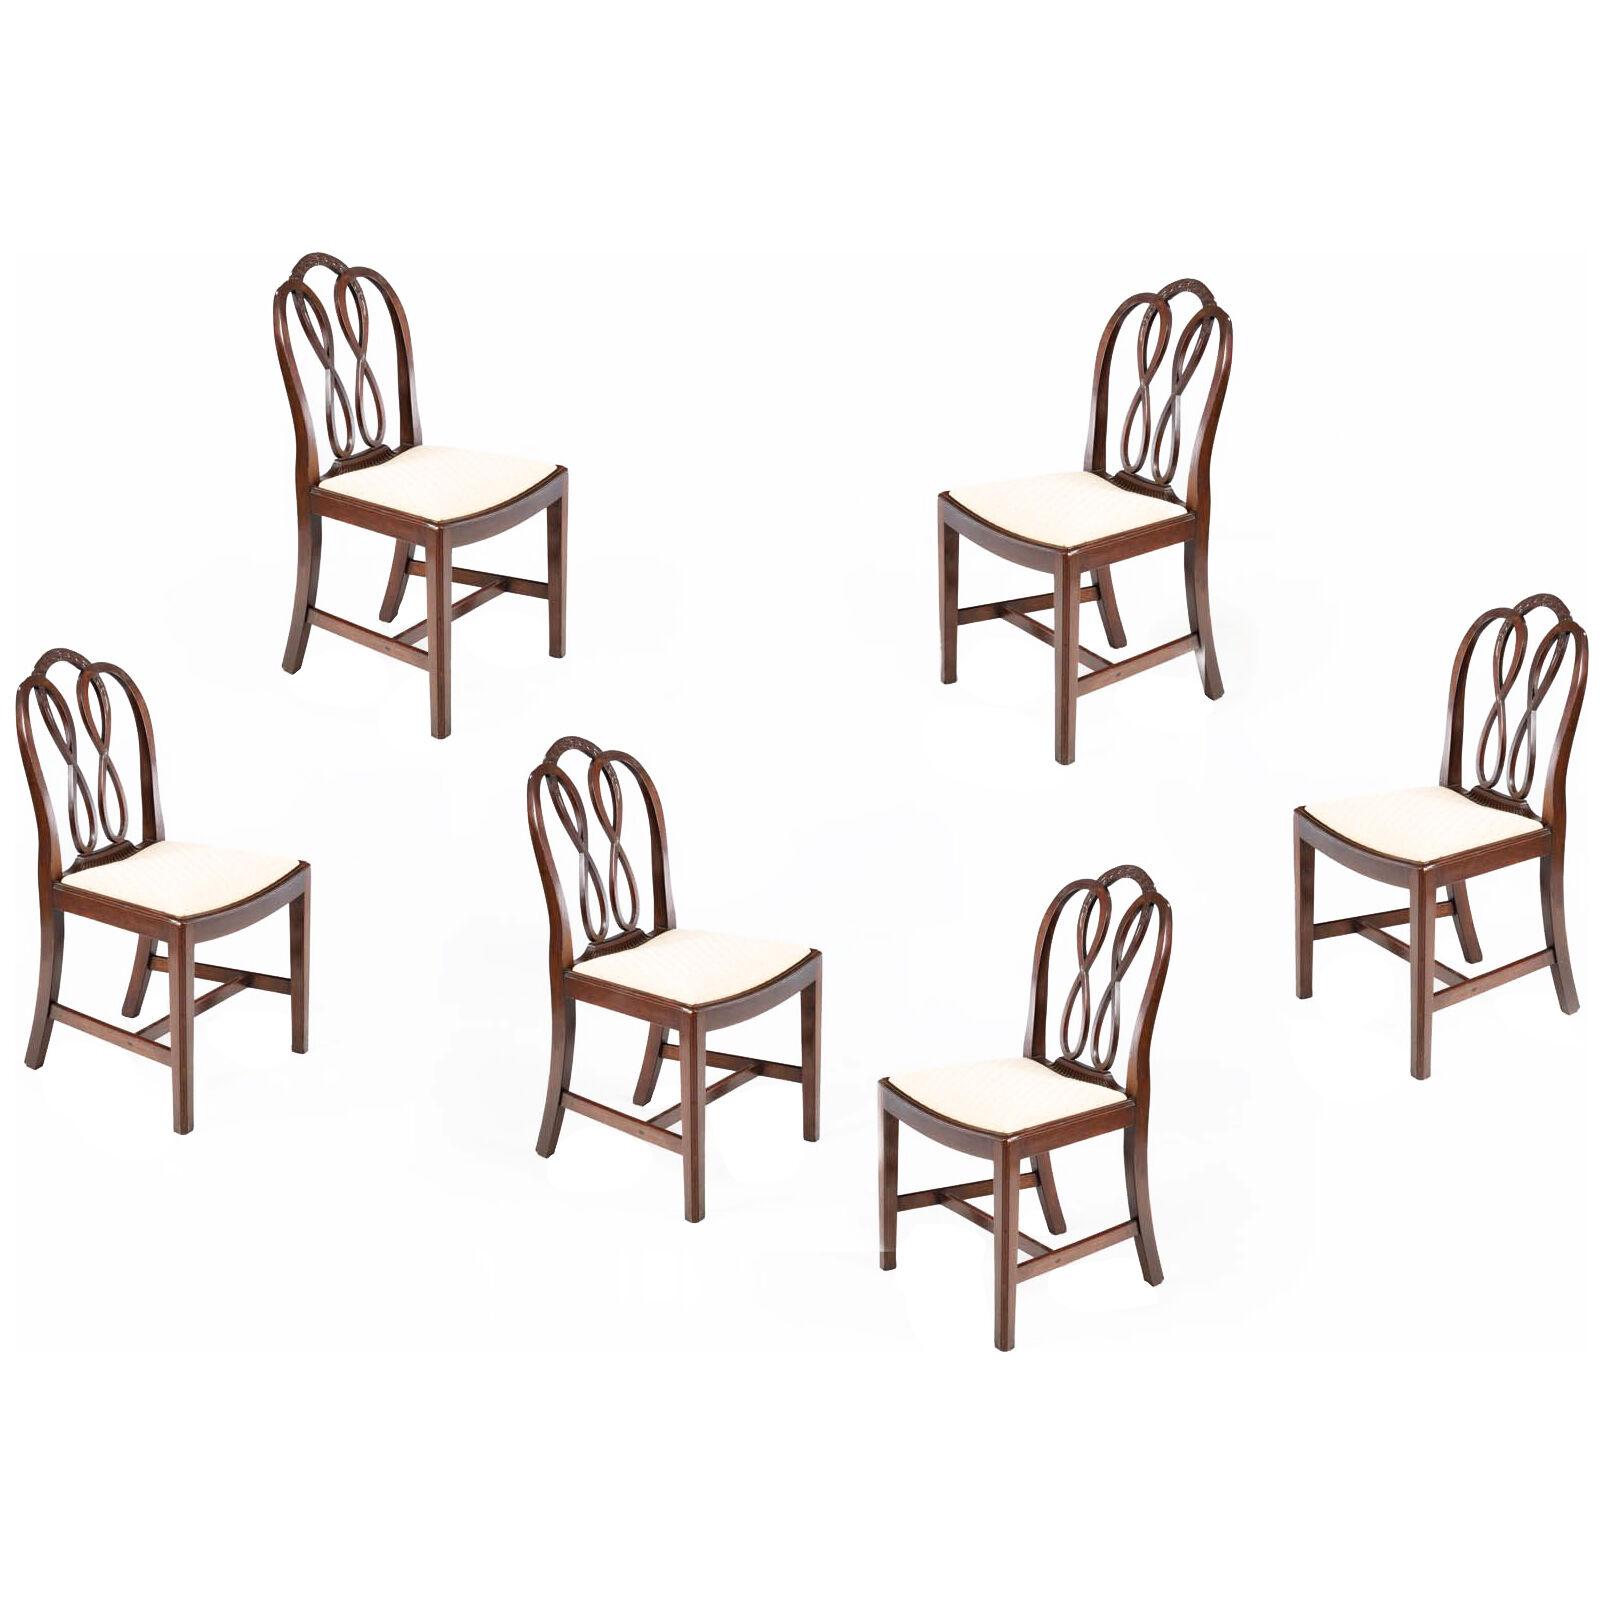 Early 19th Century Set of Eight Mahogany Hepplewhite-Style Dining Chairs